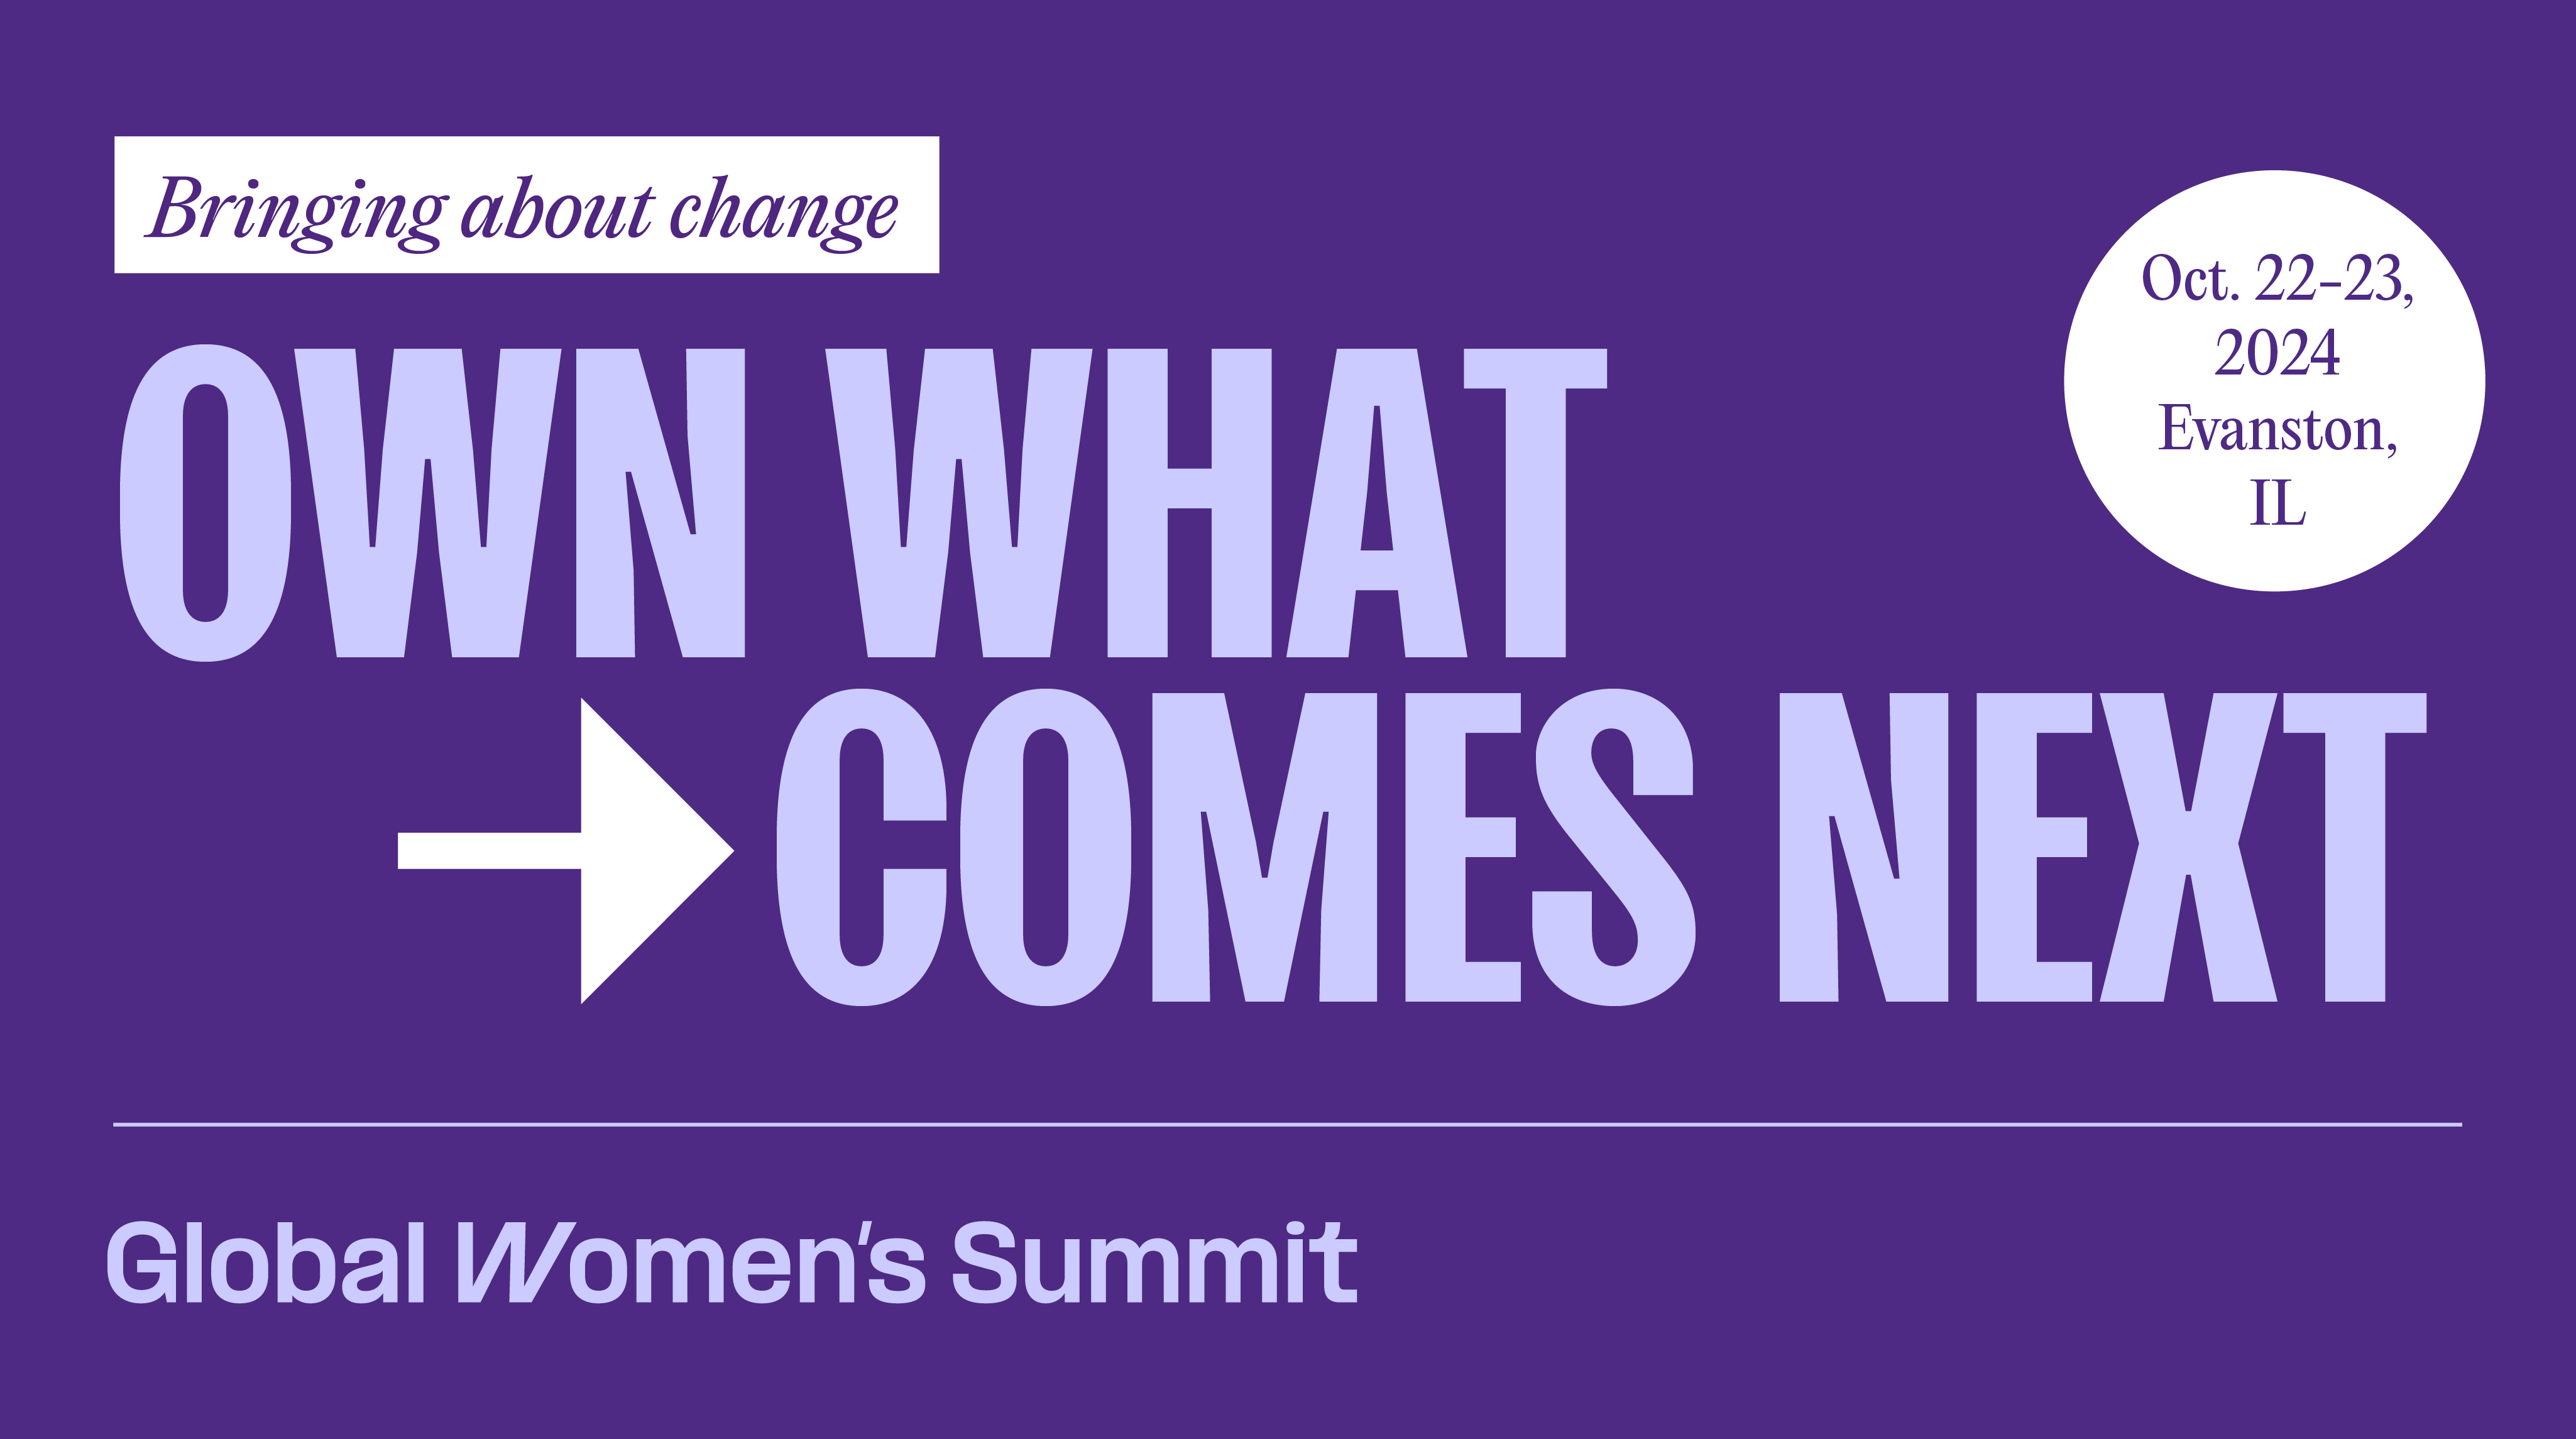 Purple graphic with lavender and white text that reads: "Bringing about change. Own what comes next. Global Women's Summit. Oct. 22-23, 2024 Evanston, IL."